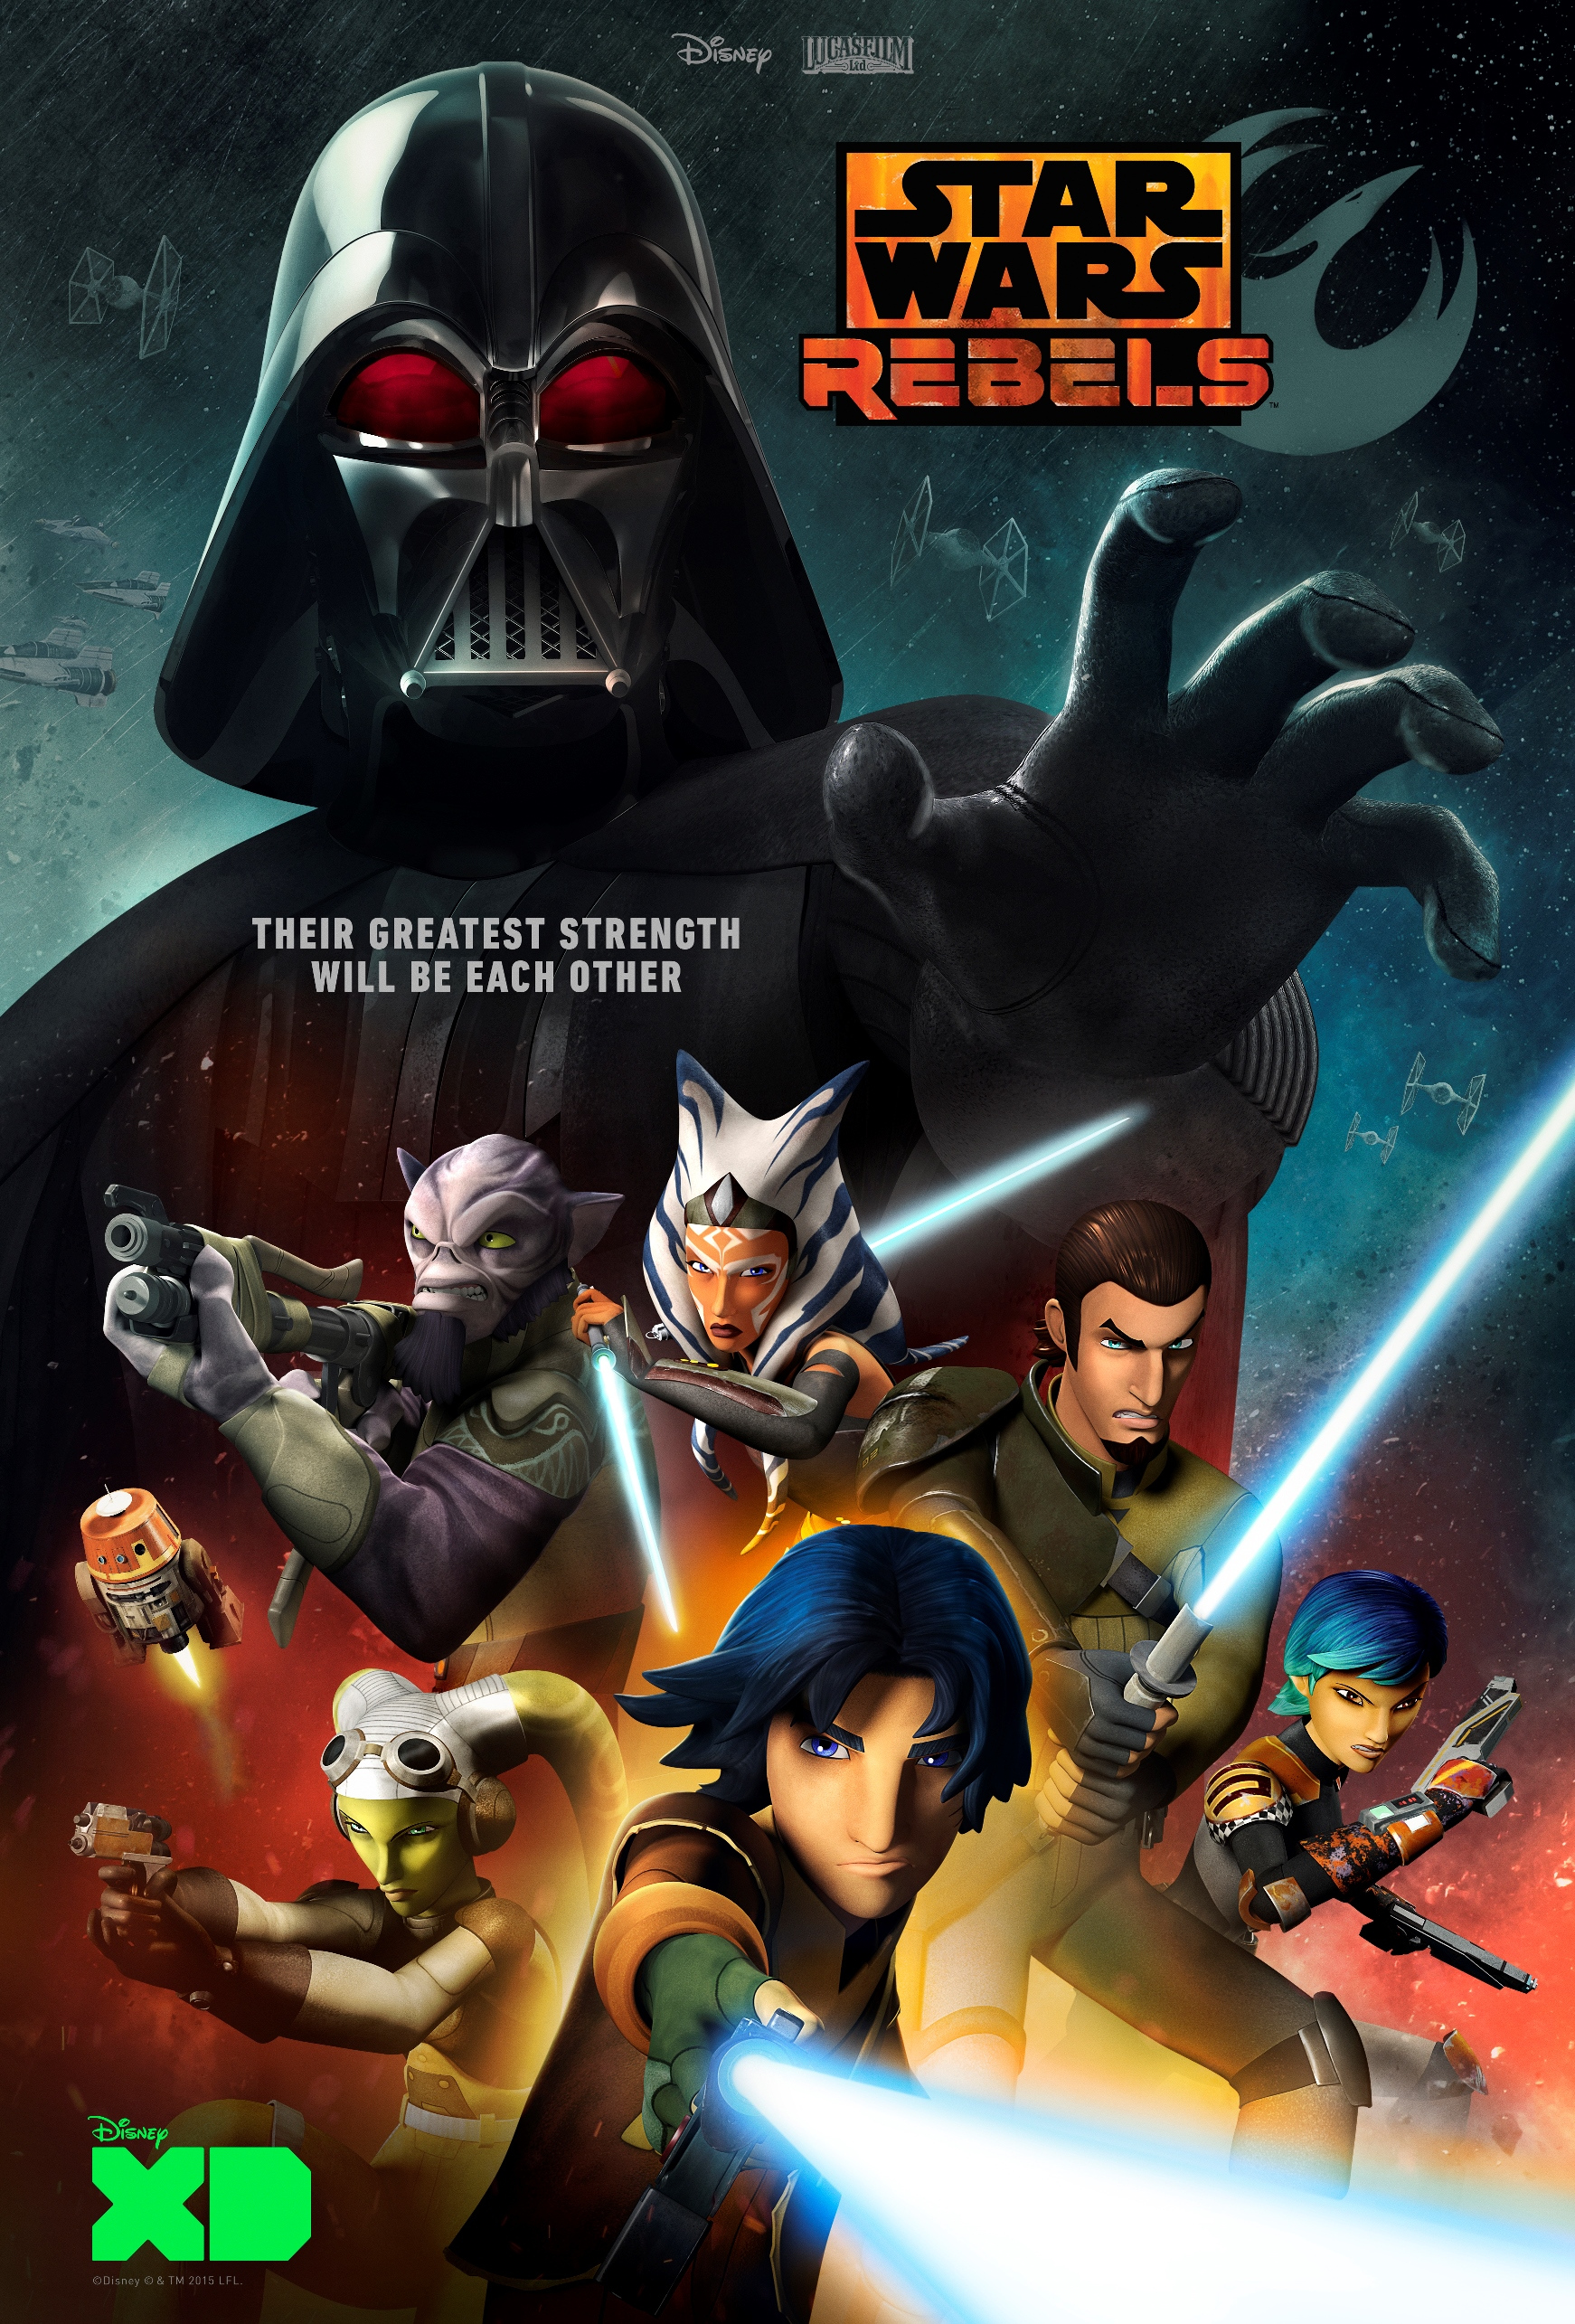 Watch the best animated show on TV, Star Wars Rebels!